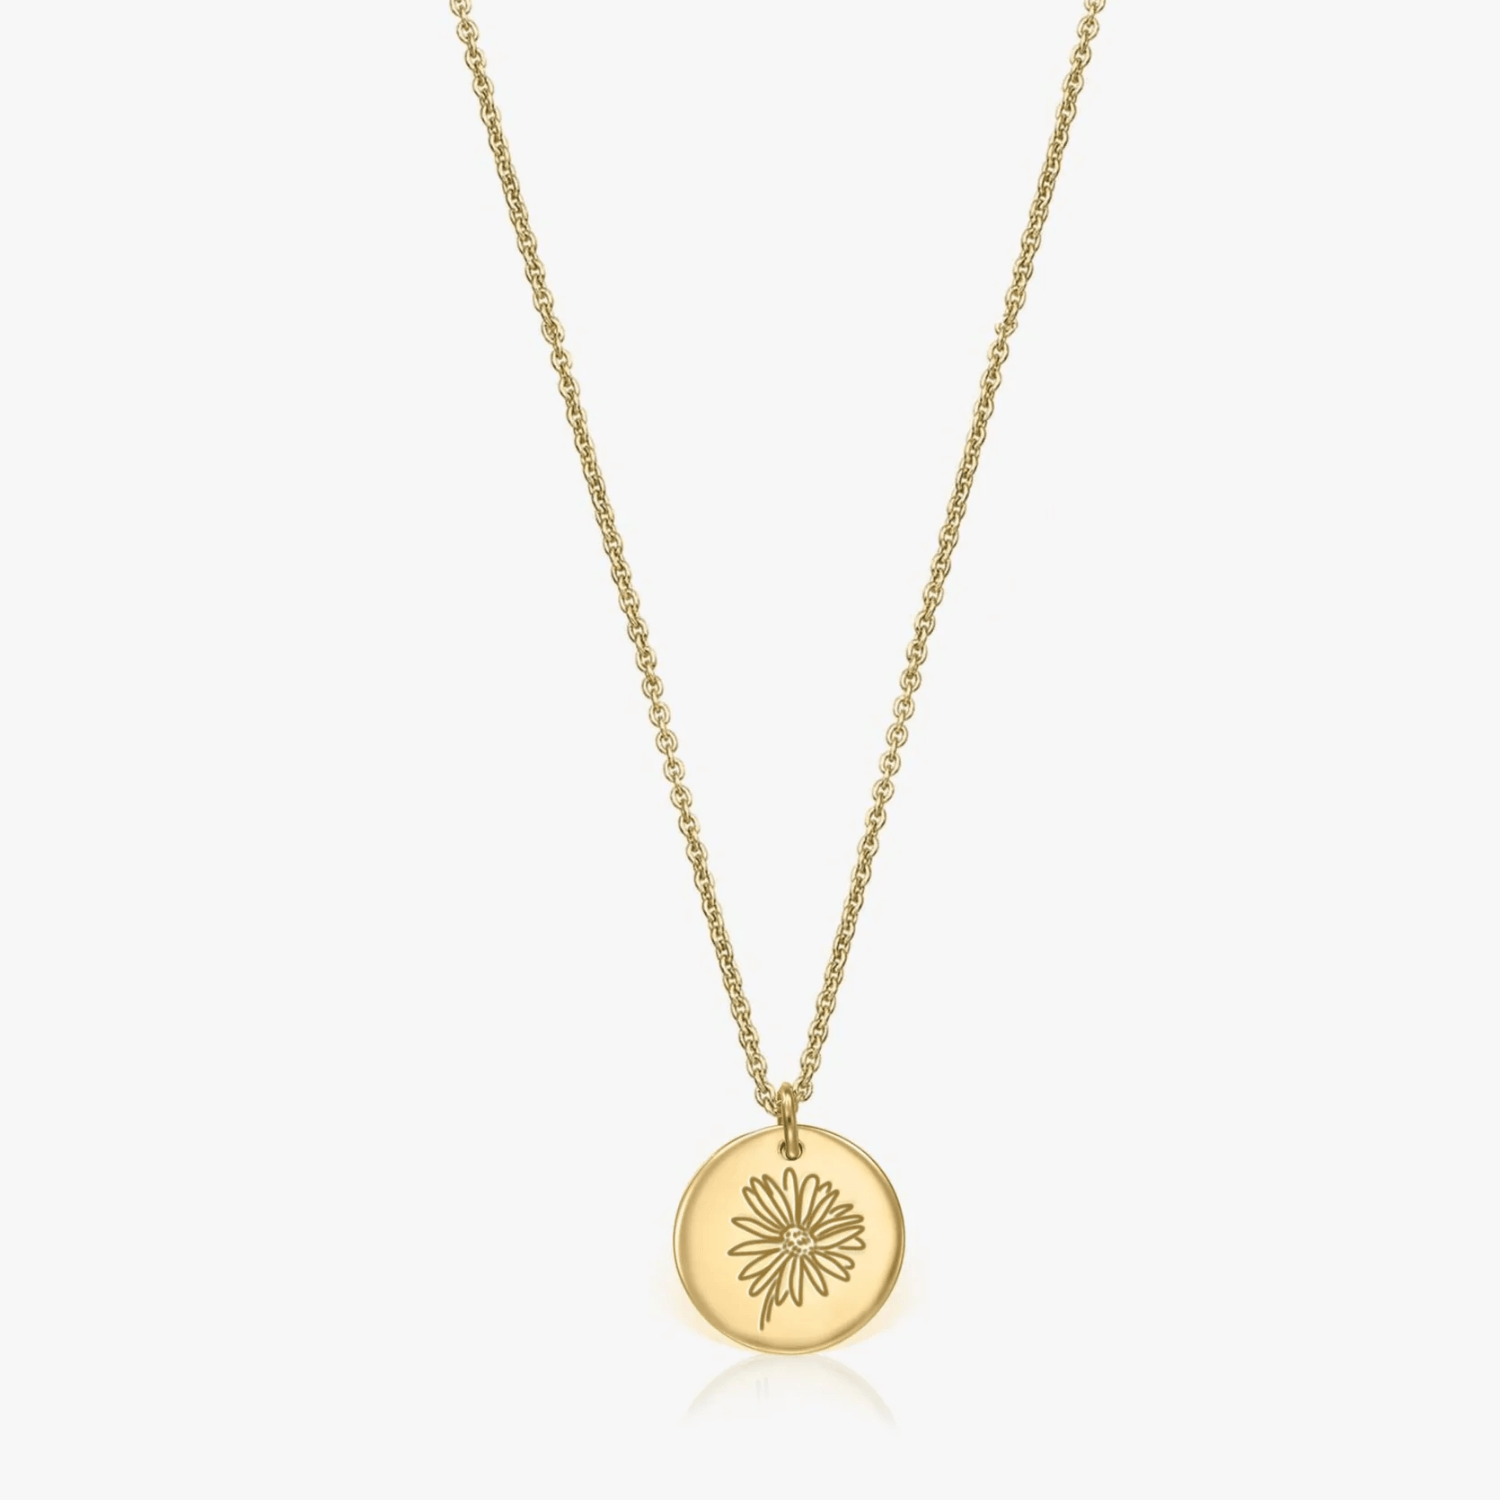 Silver necklace Birth Flower Golden - April Daisy